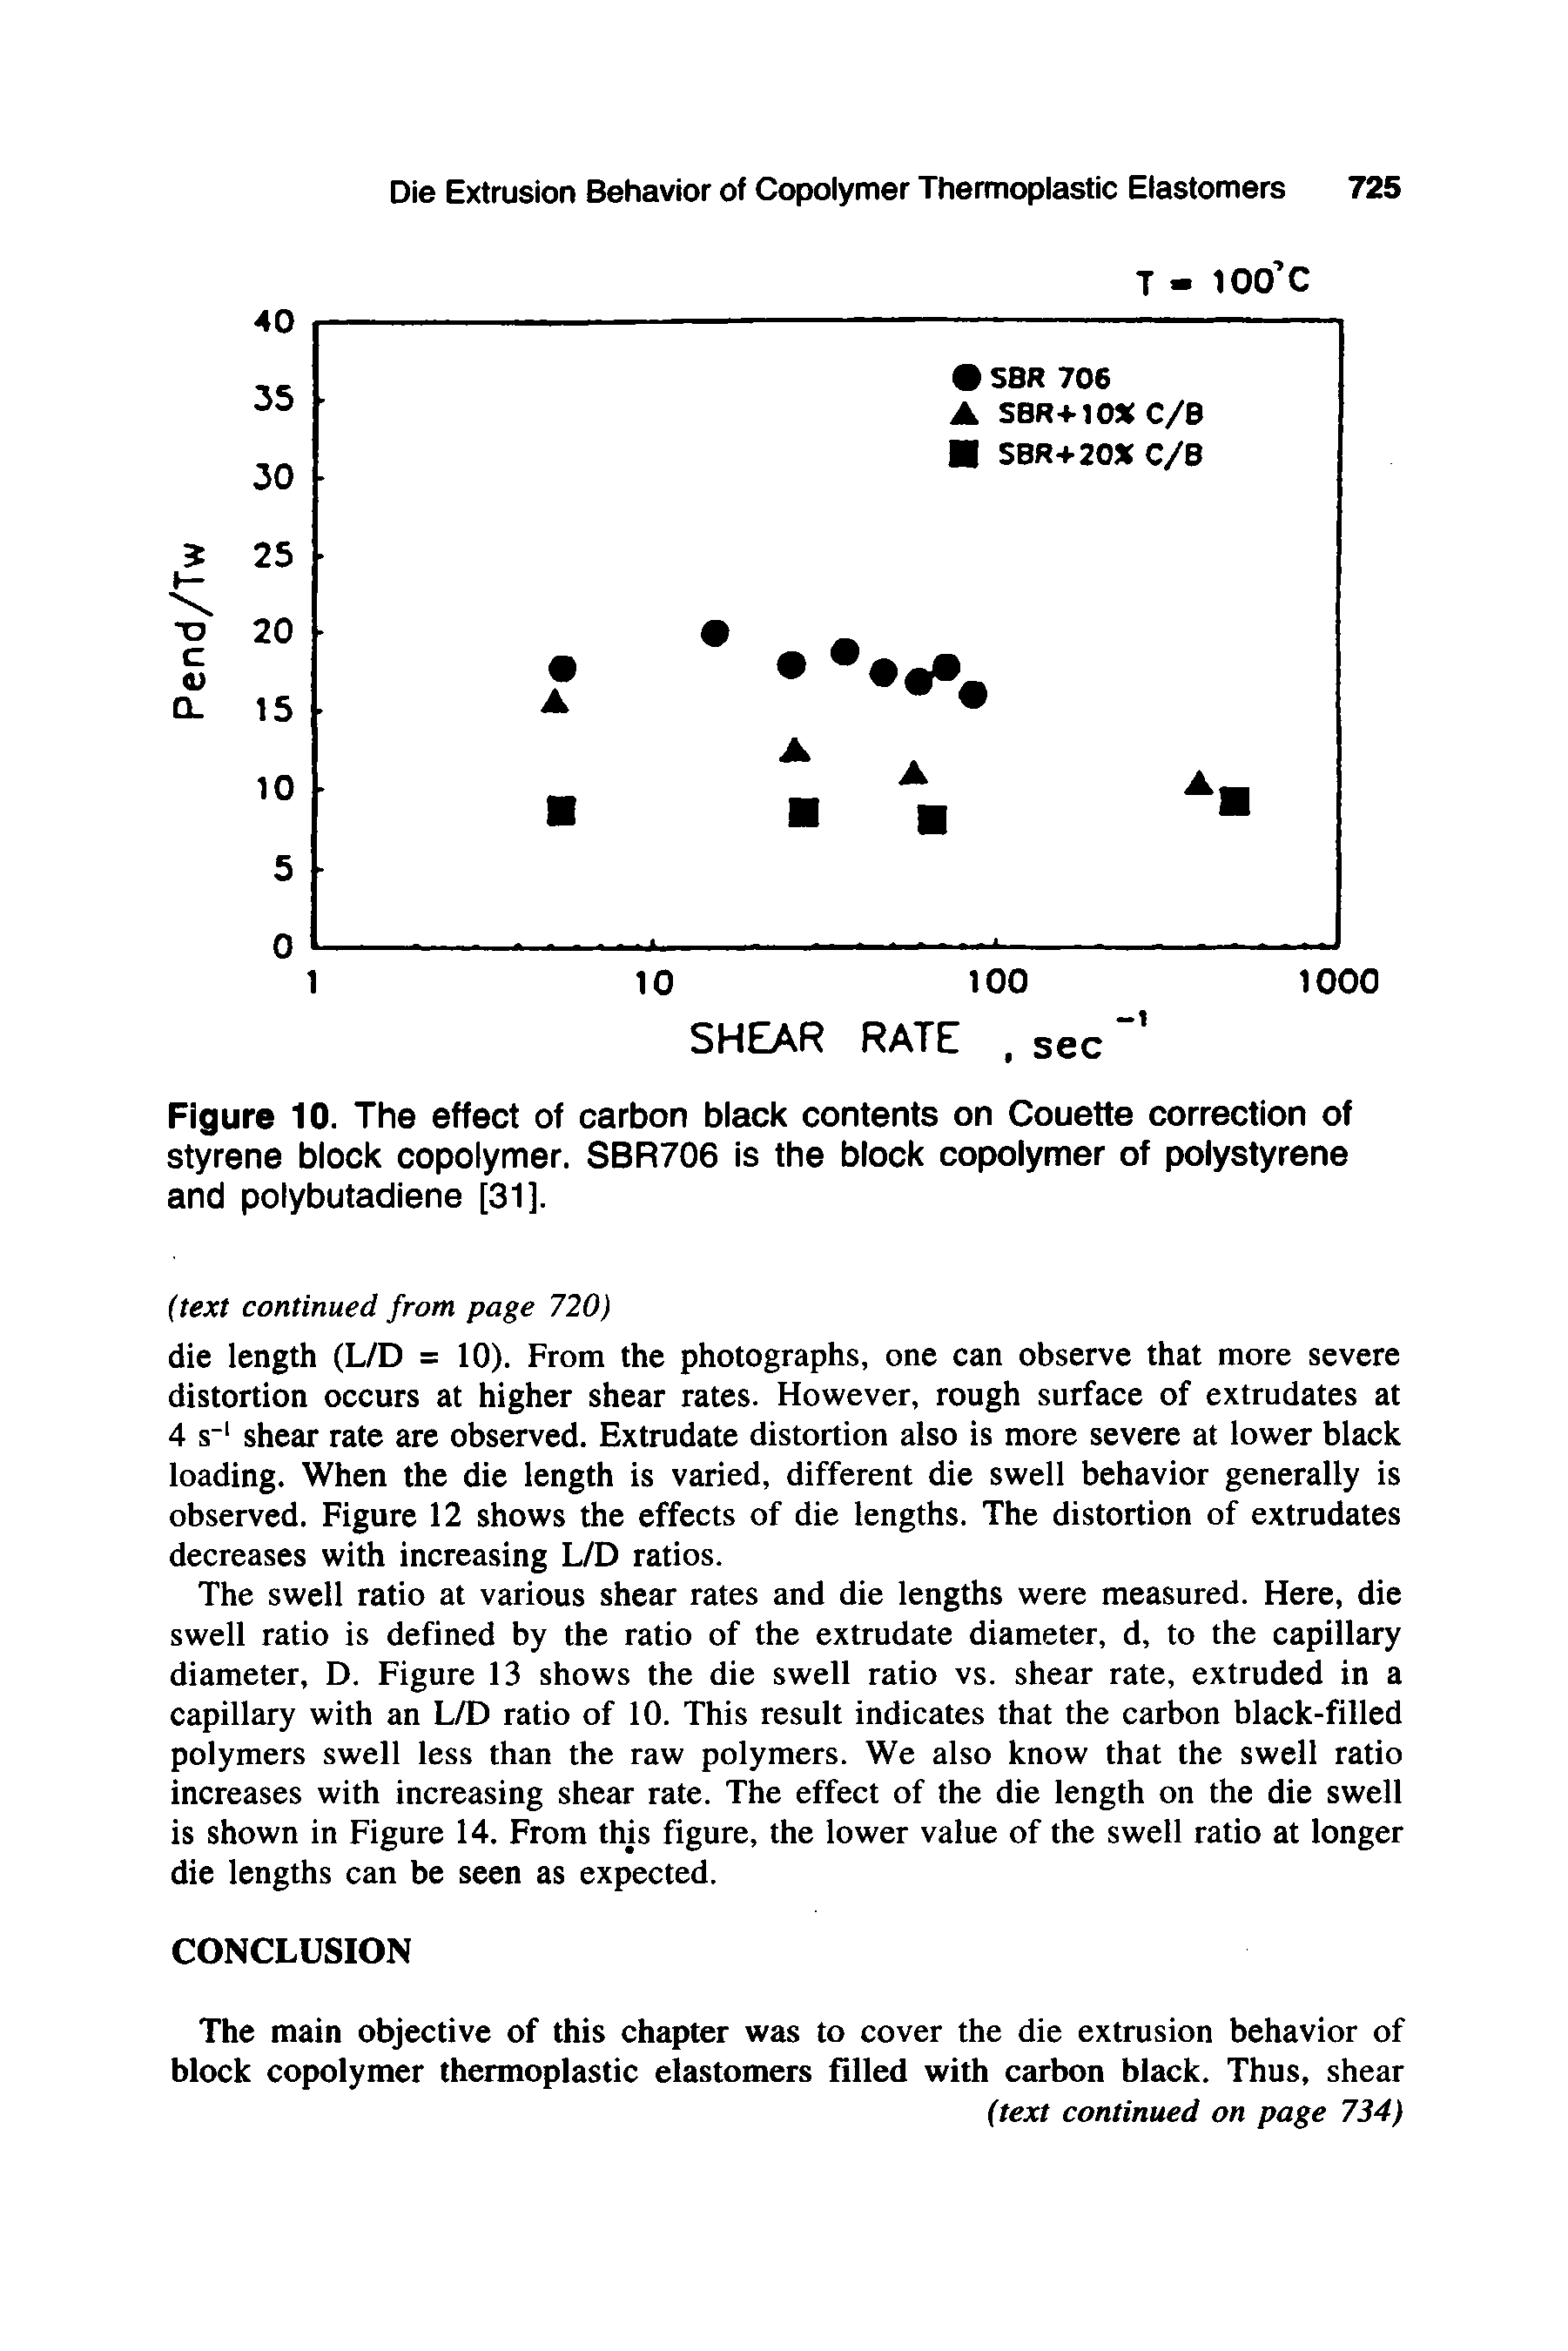 Figure 10. The effect of carbon black contents on Couette correction of styrene block copolymer. SBR706 is the block copolymer of polystyrene and polybutadiene [31].